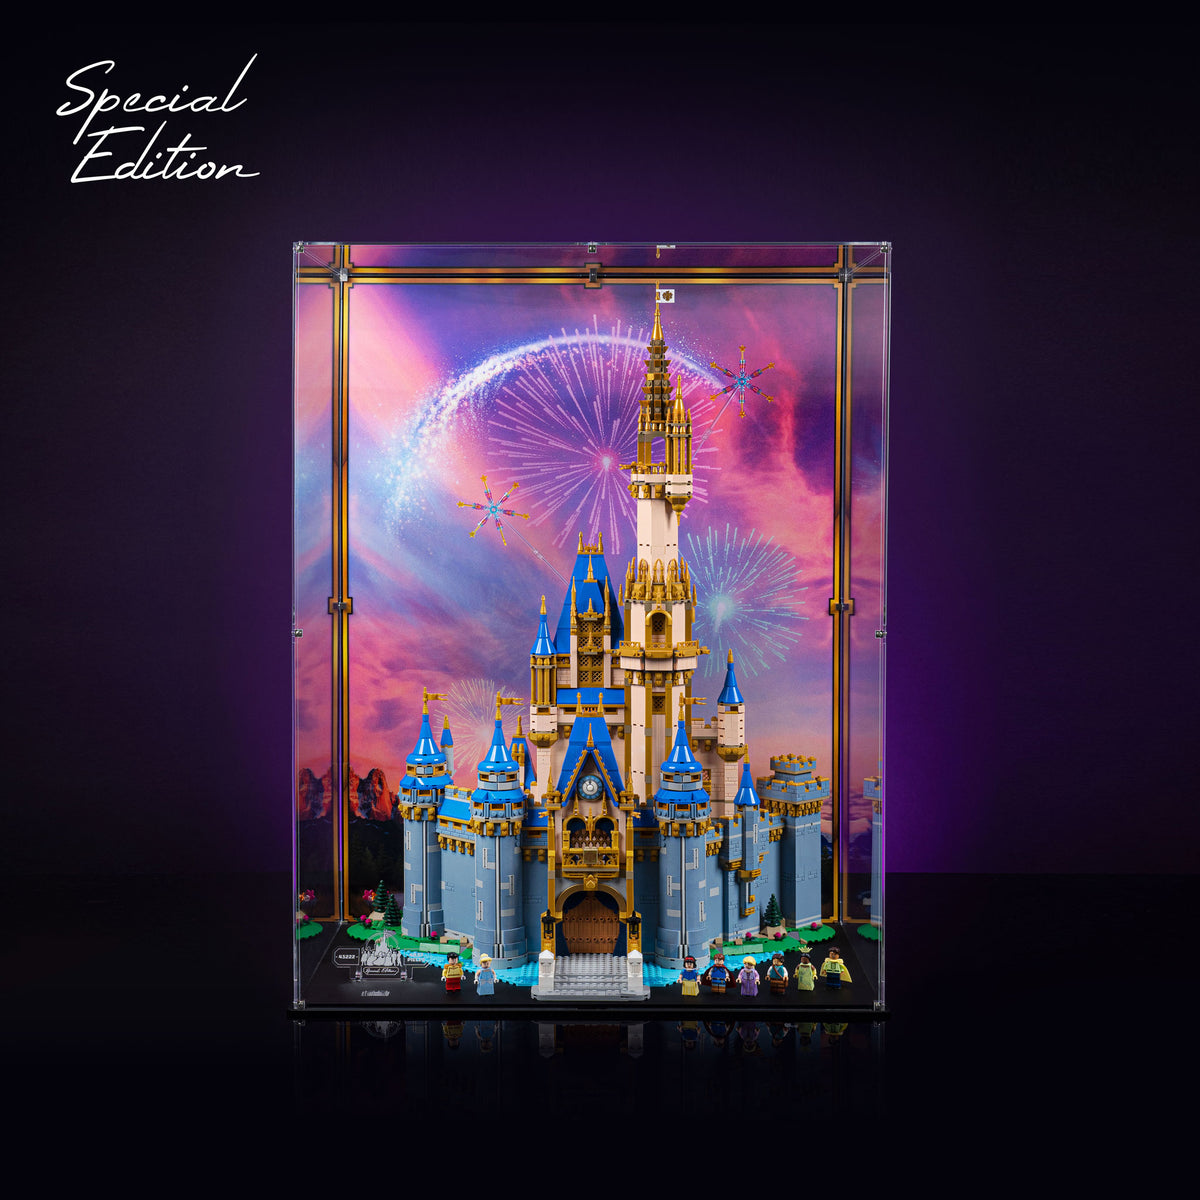 Magical Lego Disney Castle with 10,000 Bricks and LED Lights